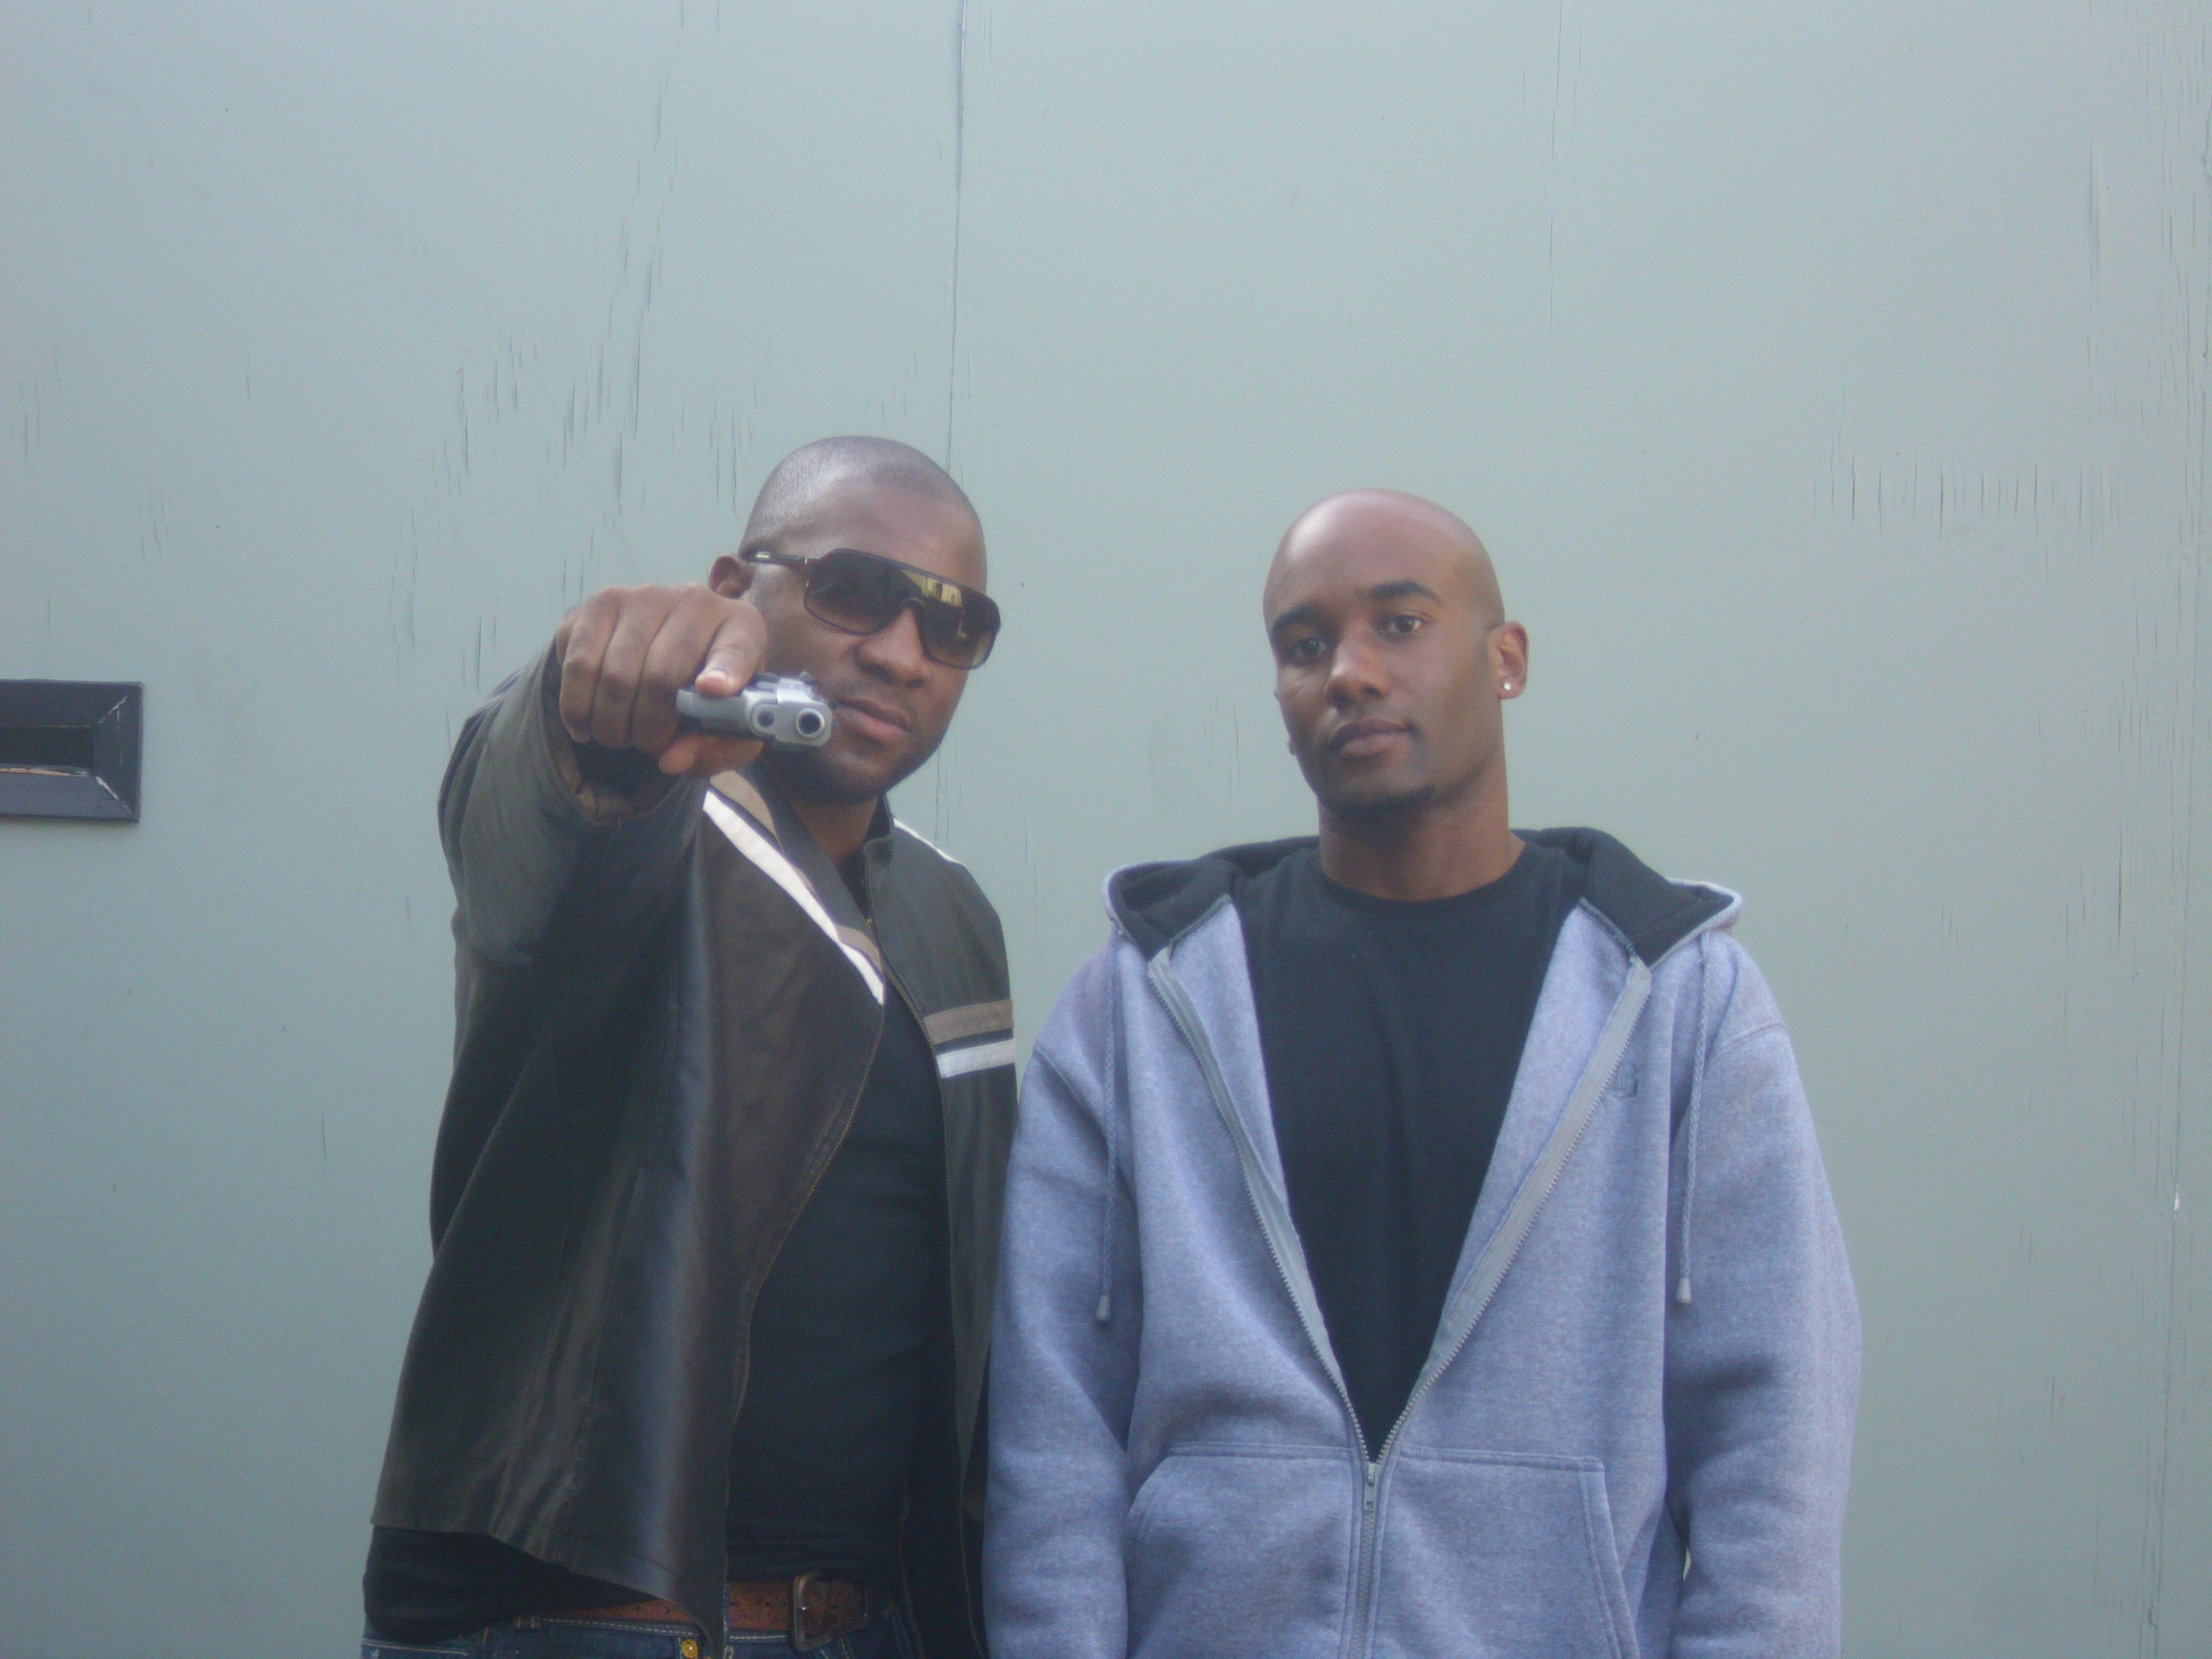 Durant Fowler and James Ball on the set of Business Never Personal